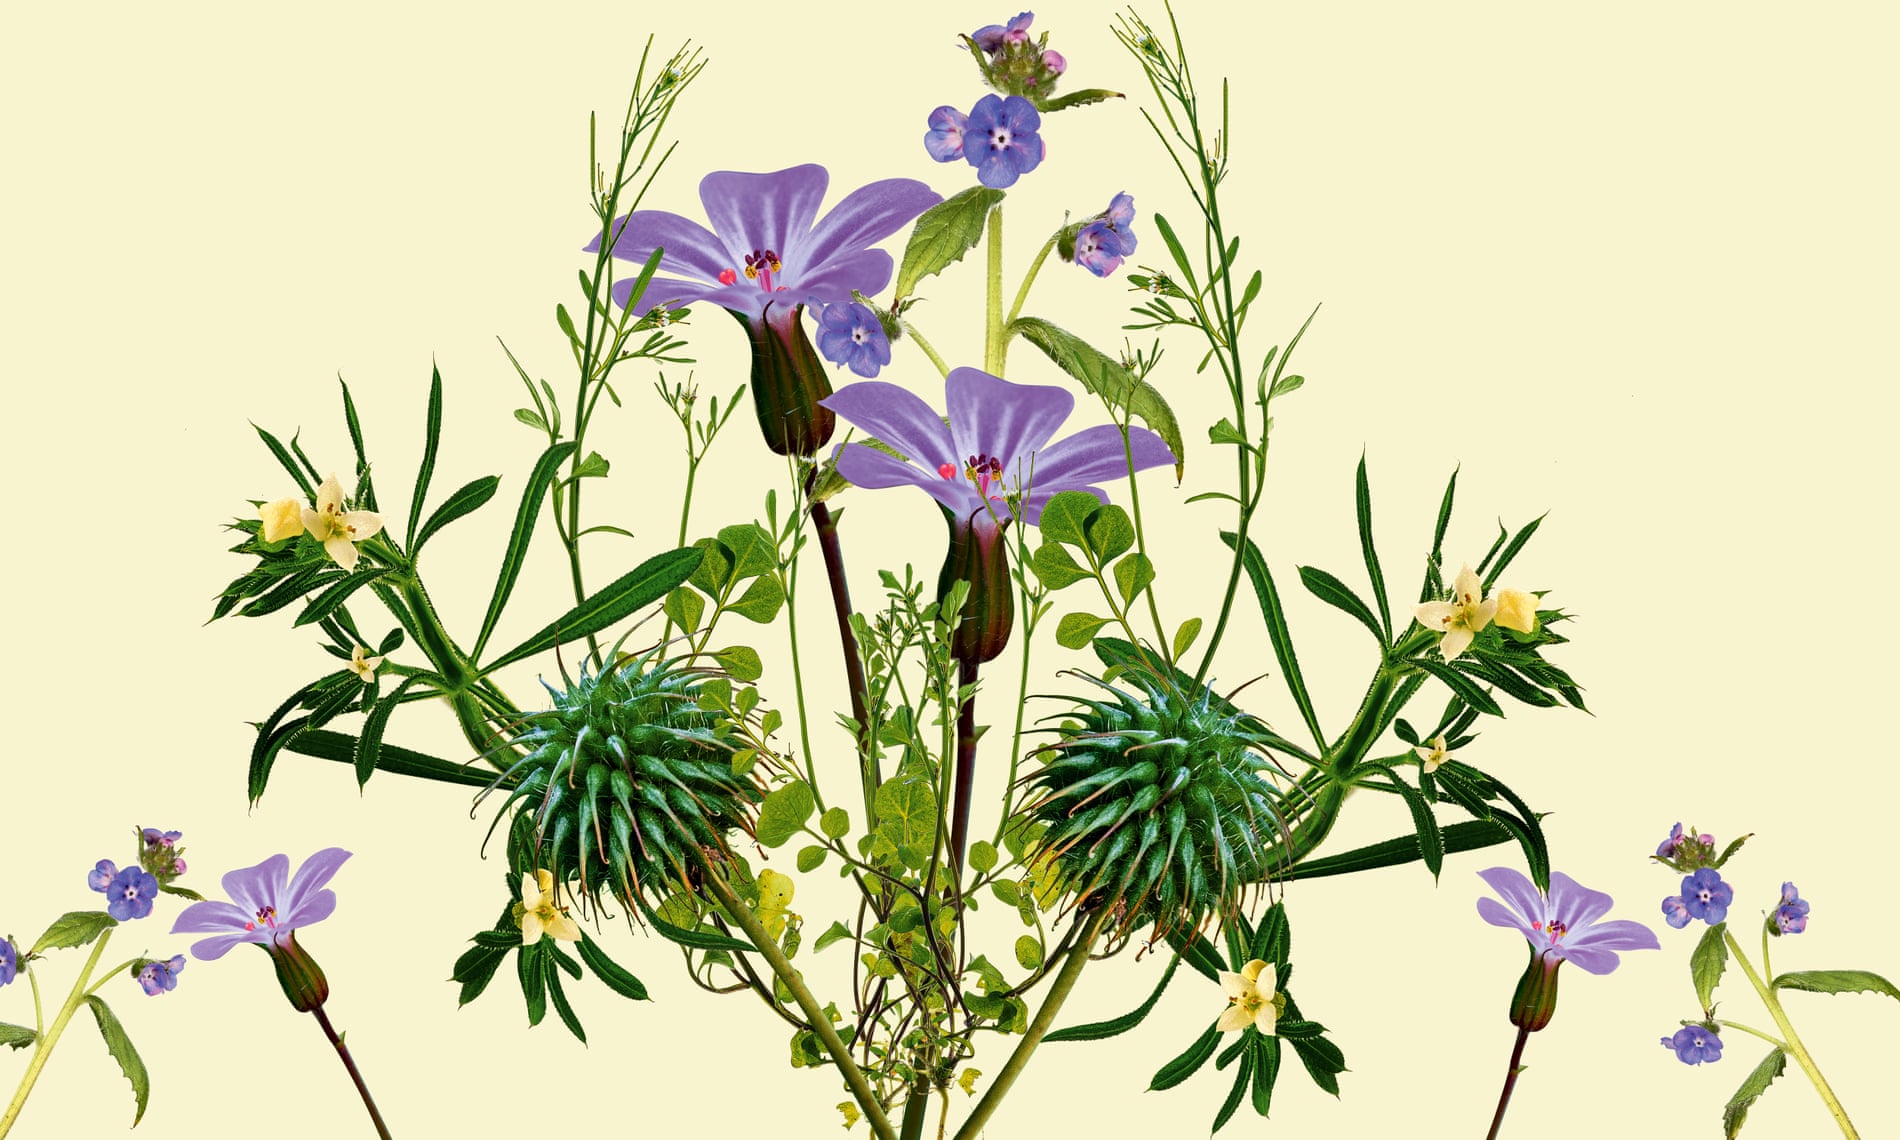 Illustration of various weeds